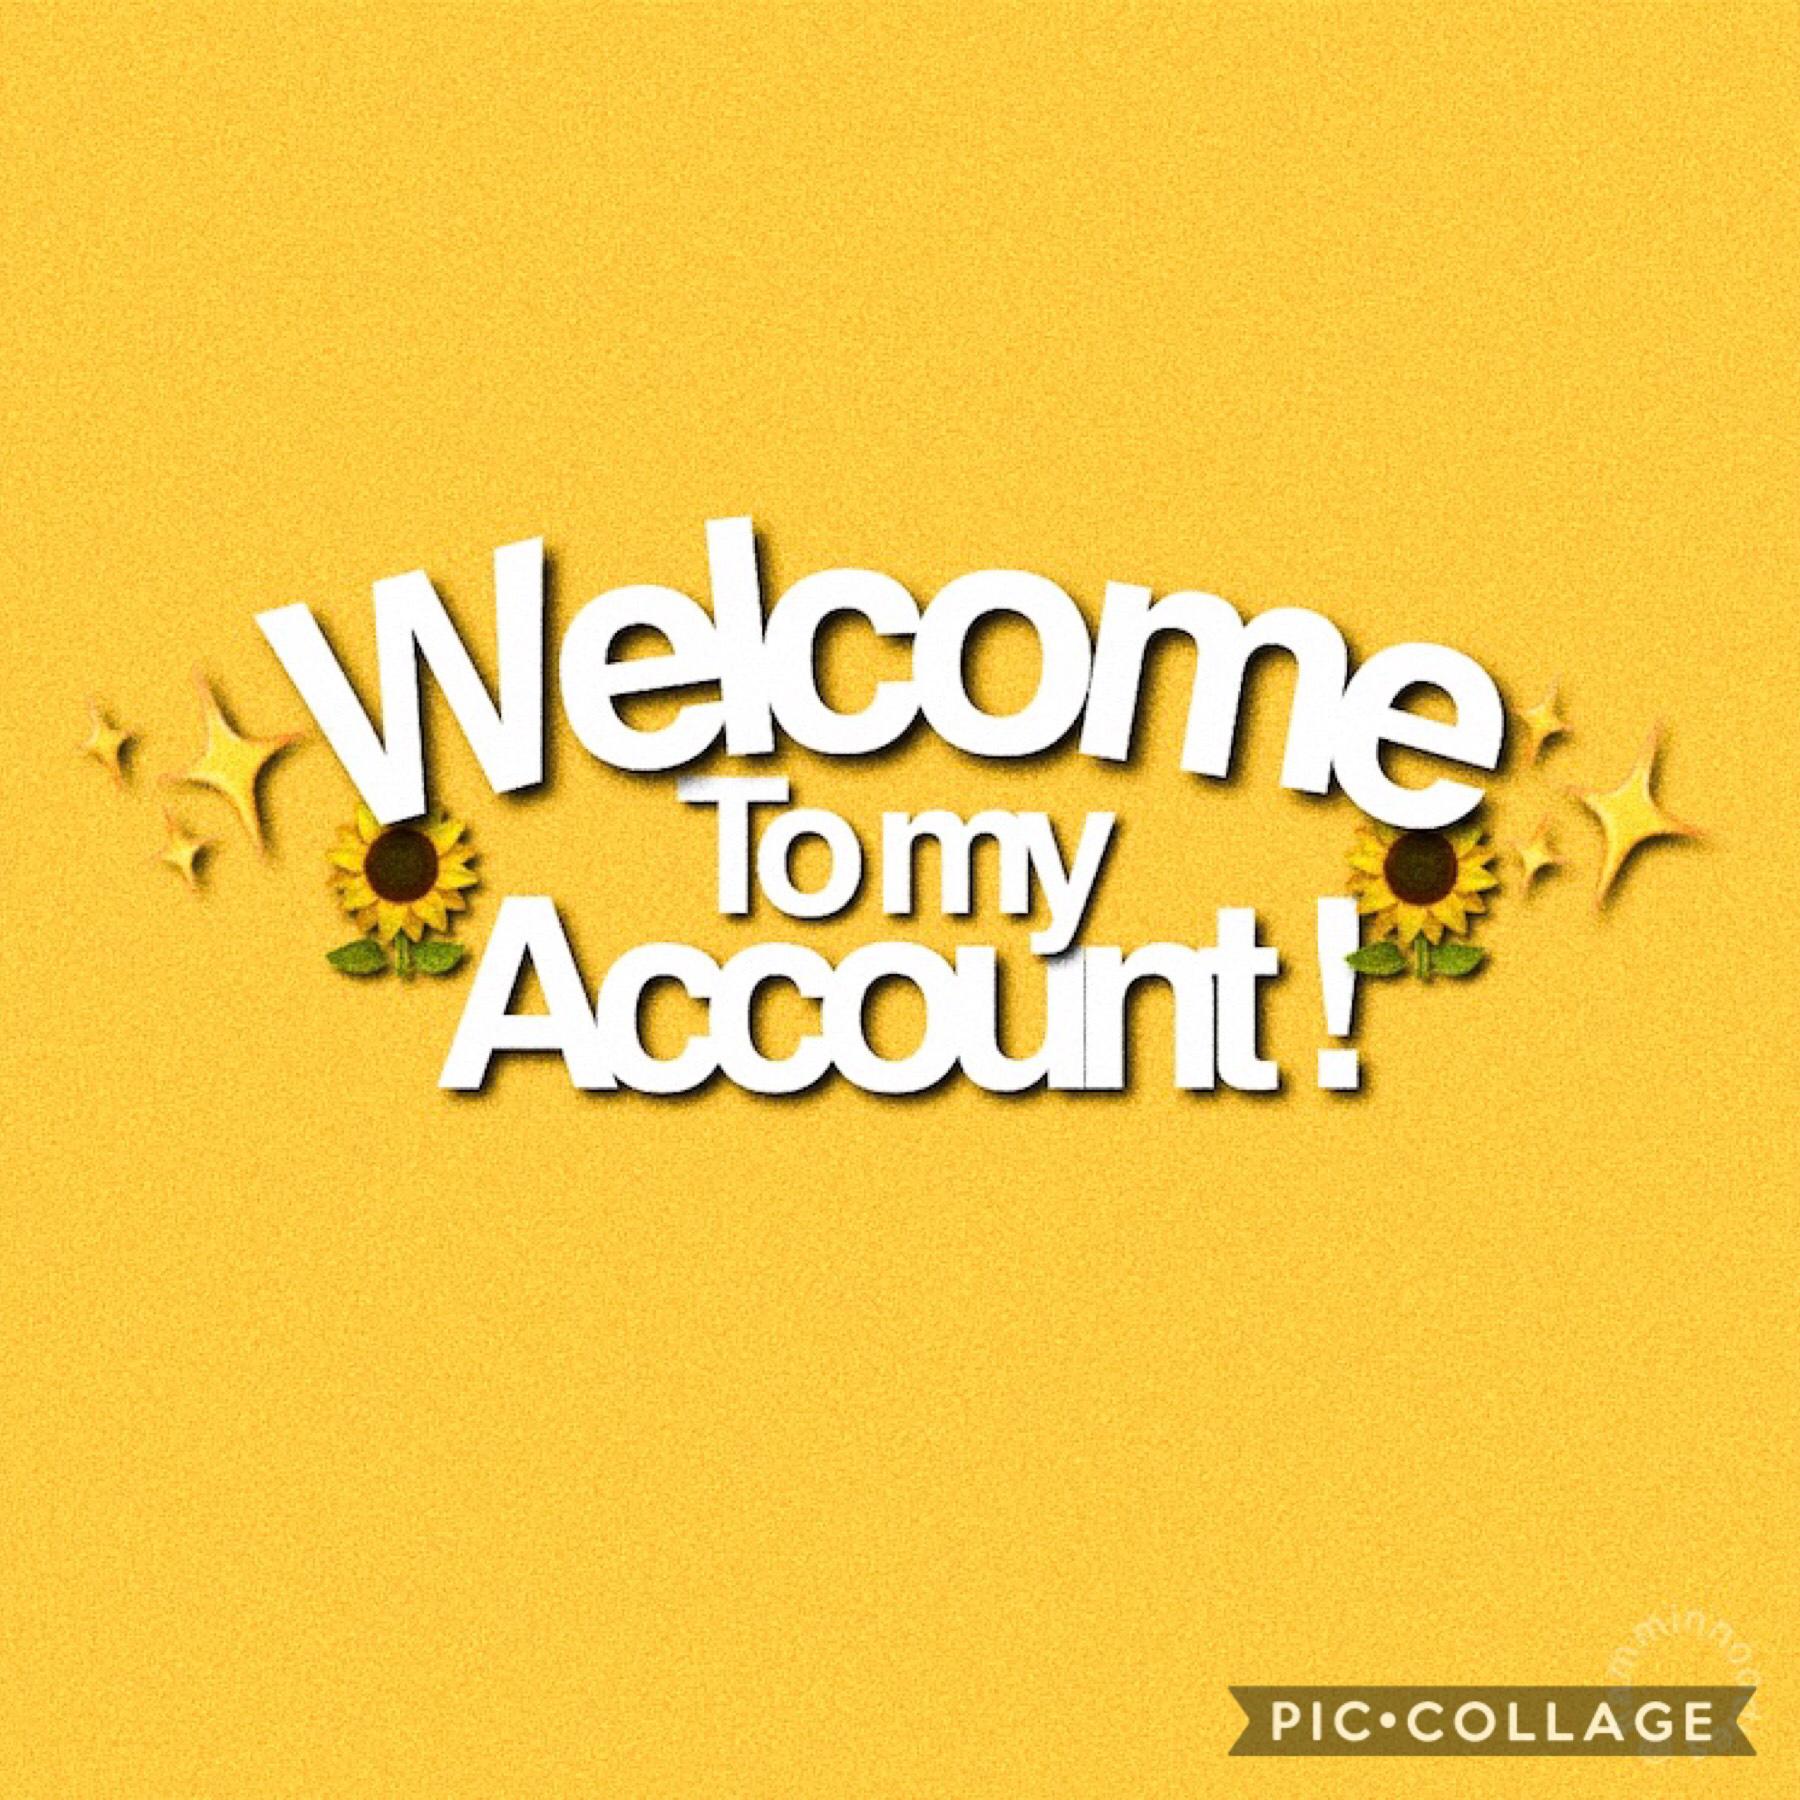 💛WELCOME 💛
